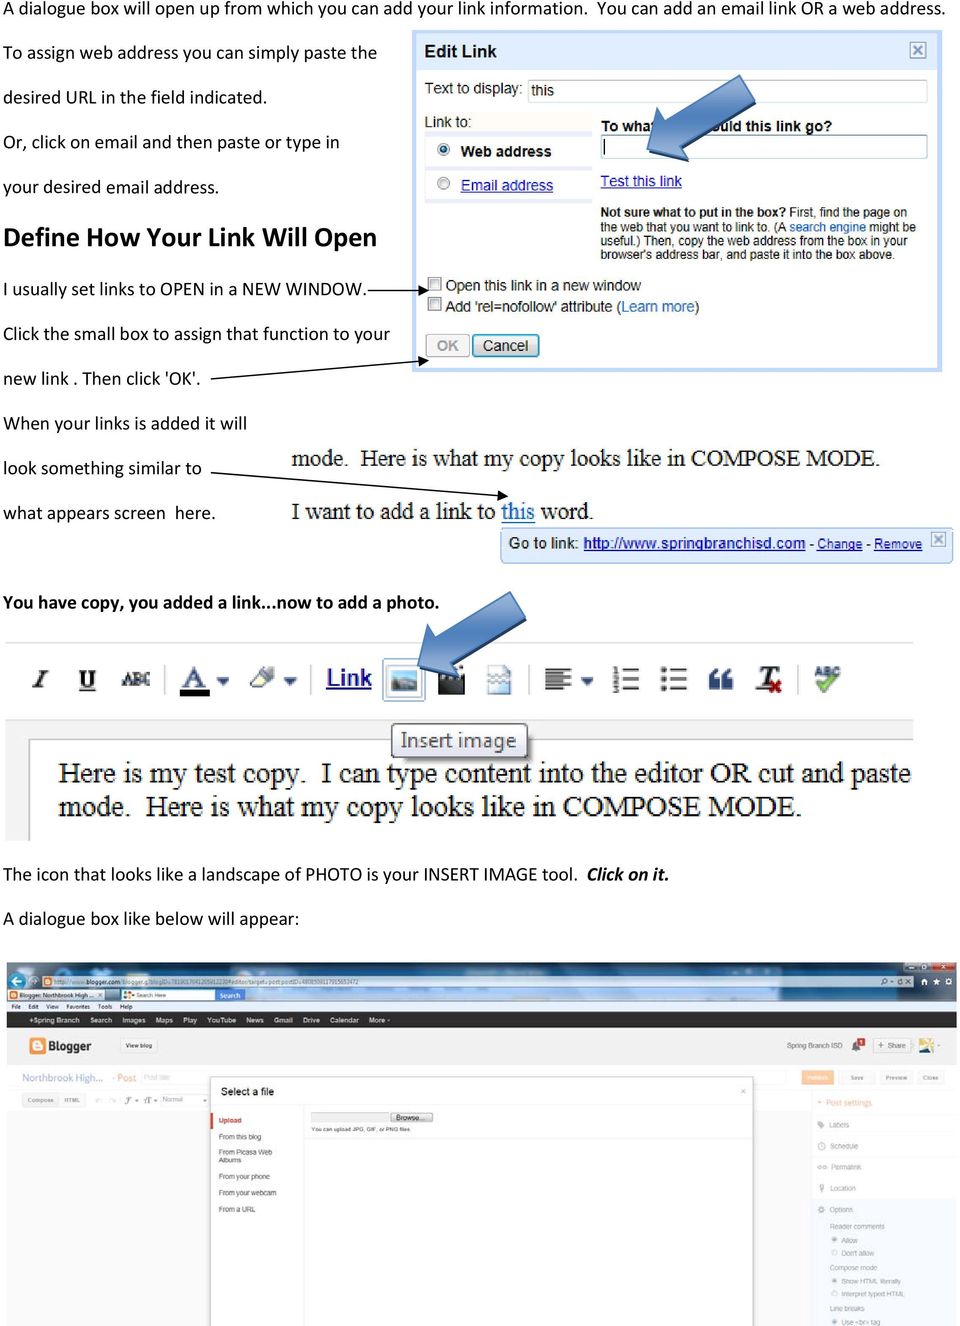 Define How Your Link Will Open I usually set links to OPEN in a NEW WINDOW. Click the small box to assign that function to your new link. Then click 'OK'.